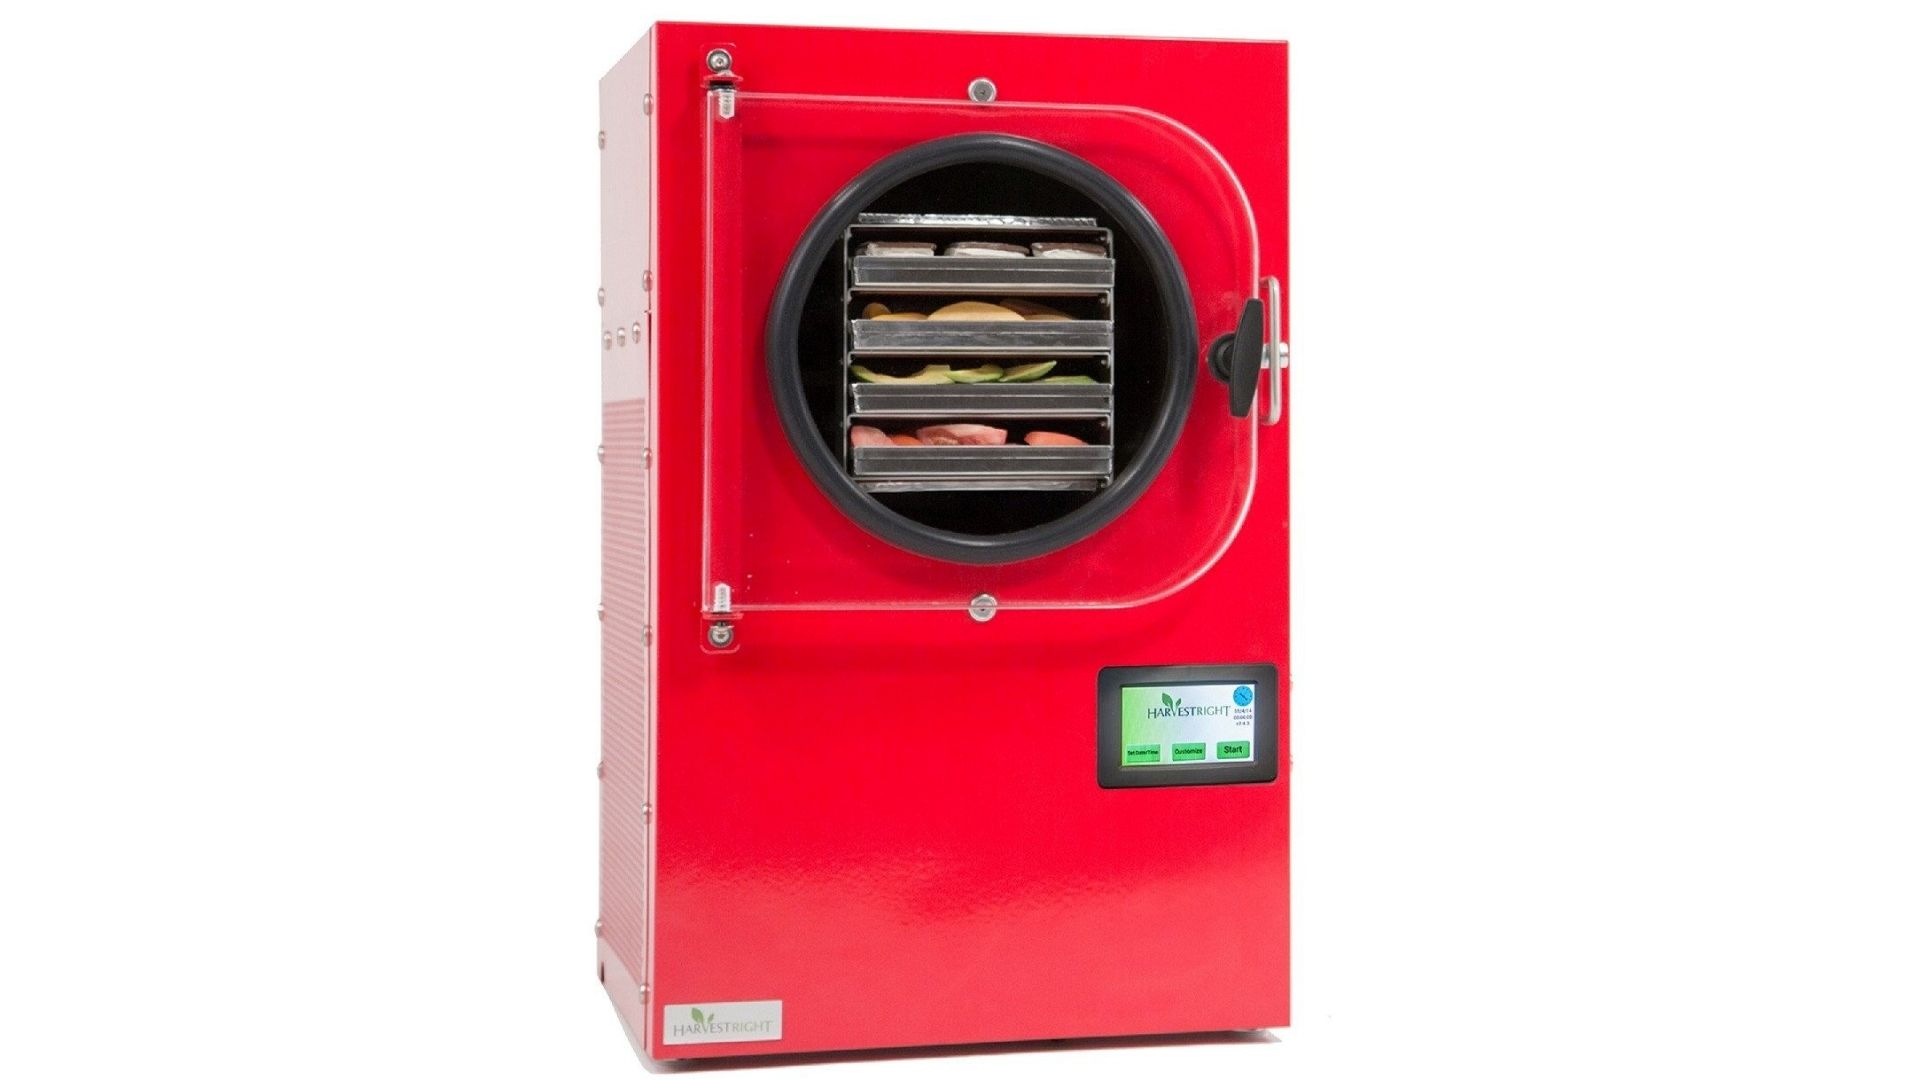 Picture of a red freeze dryer